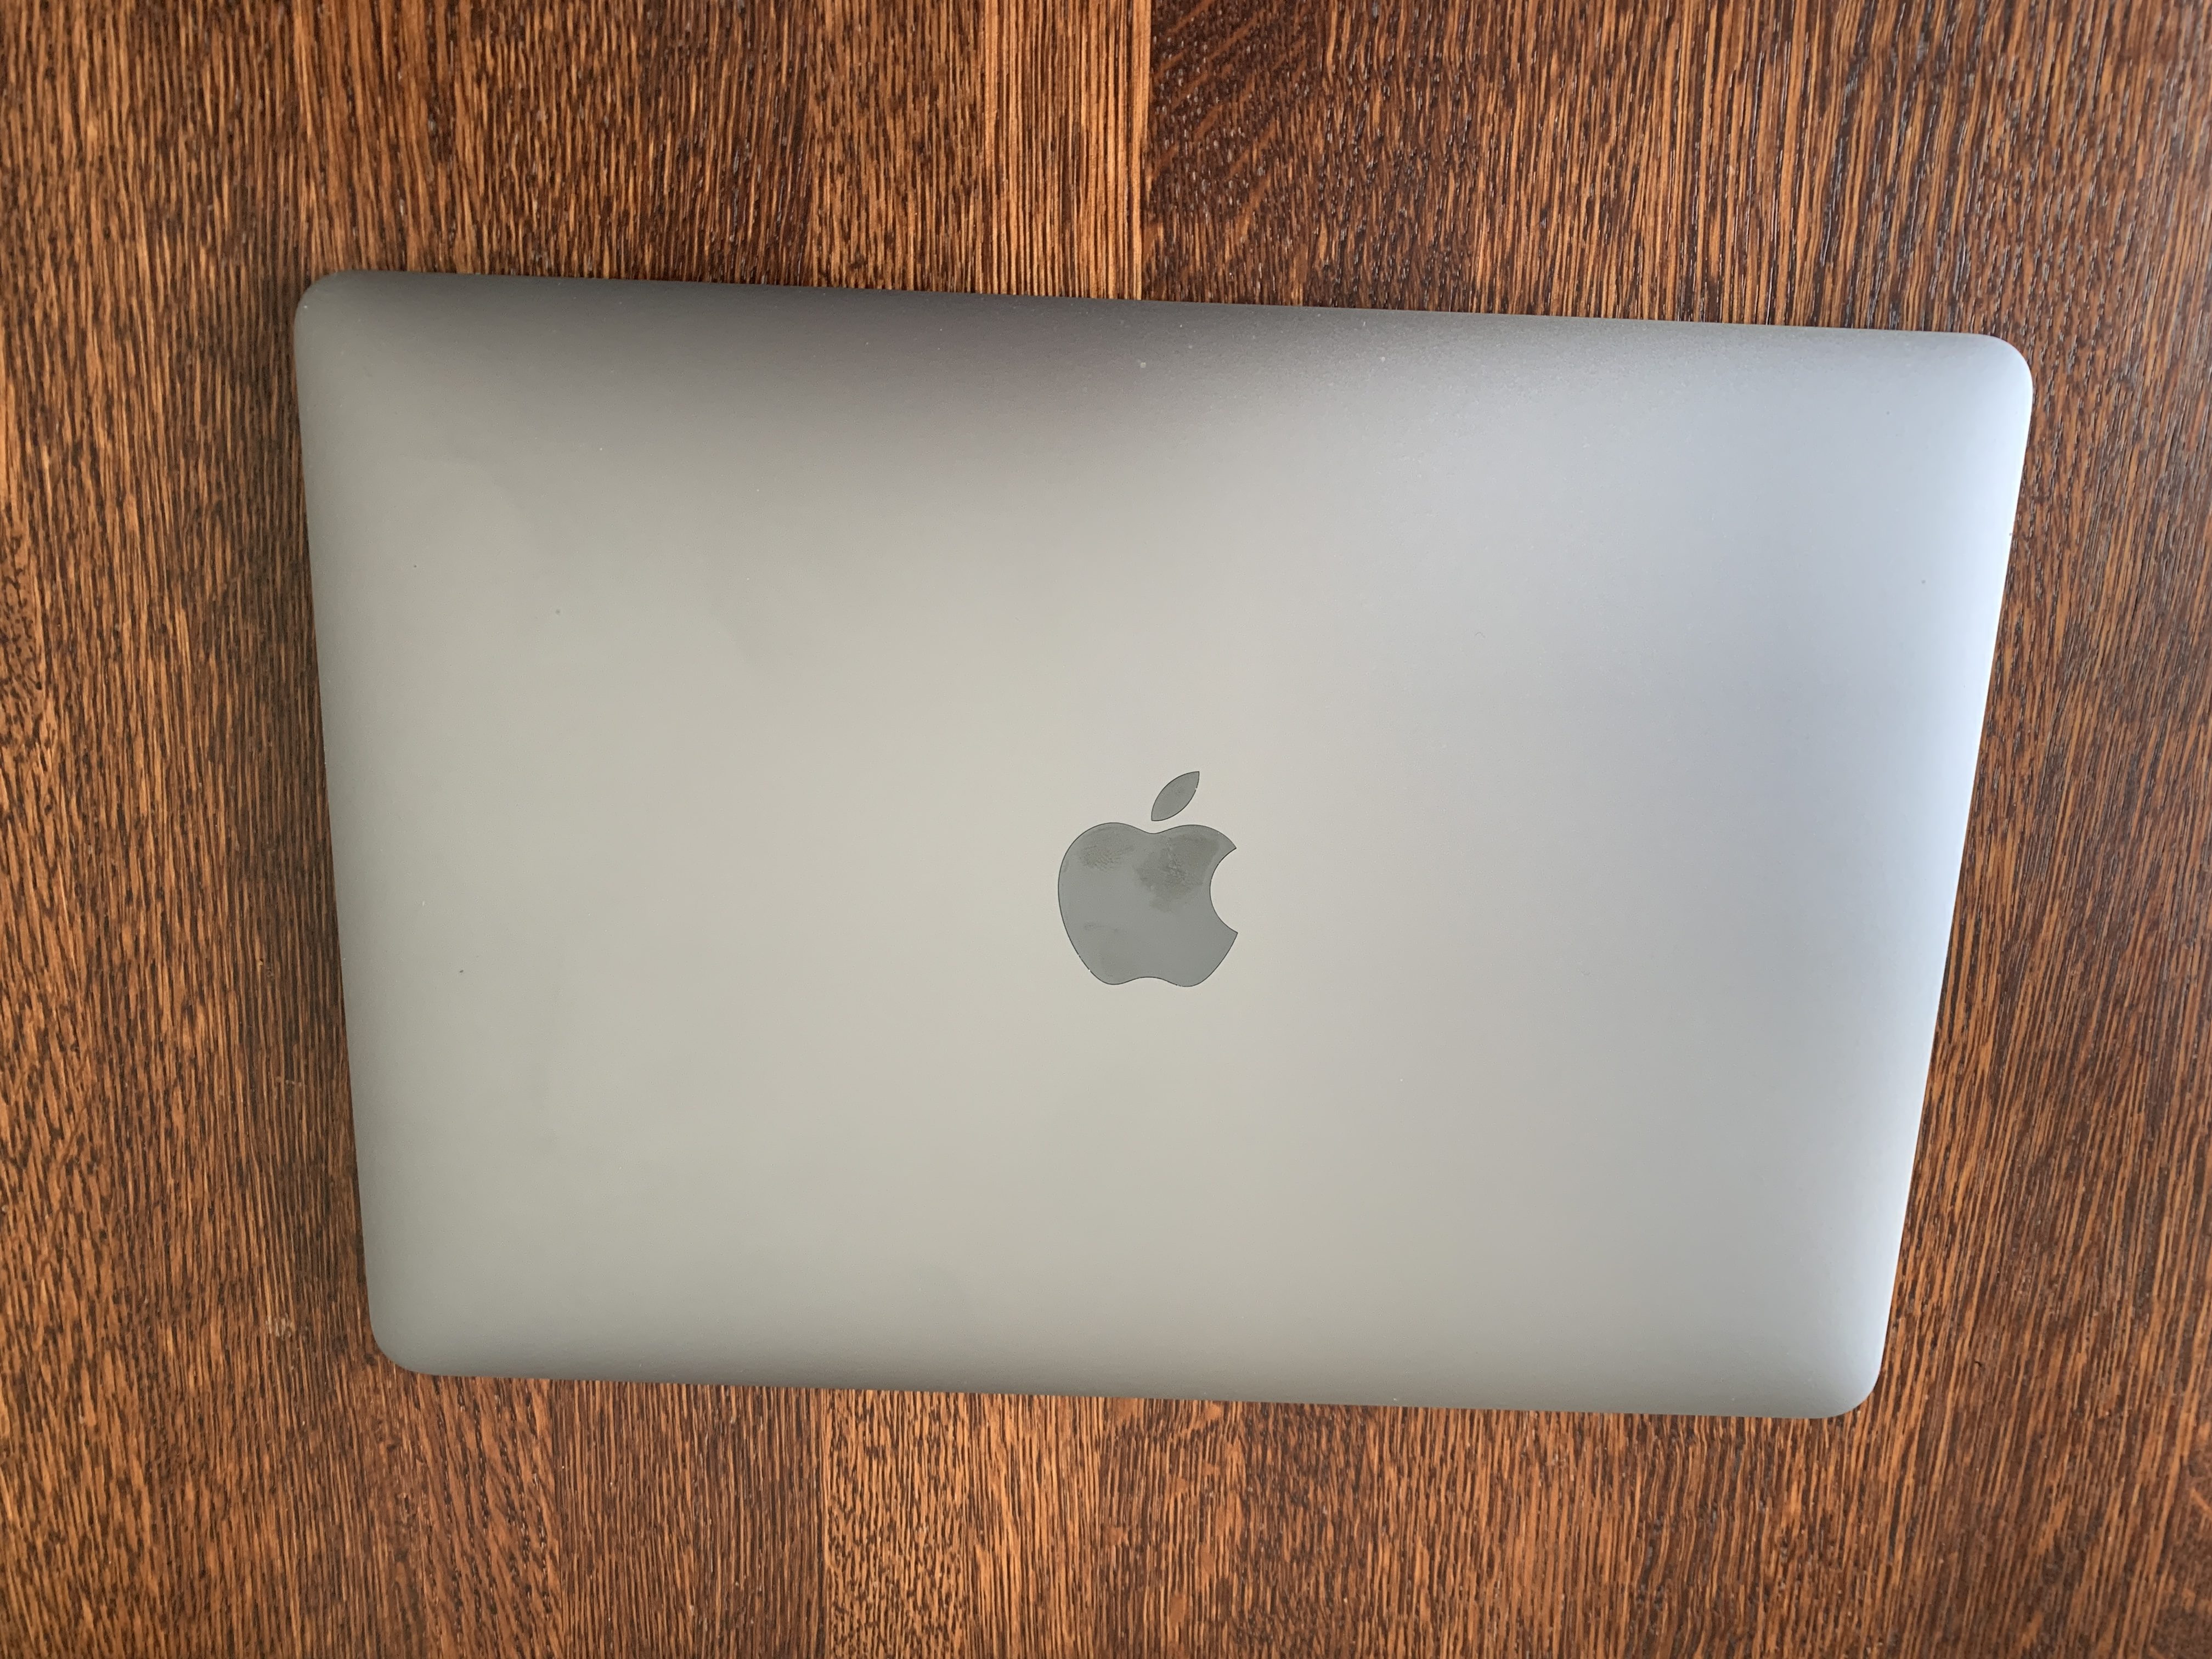 Macbook Retina 12 Inch Early 16 Space Grey Price Drop For Sale Redflagdeals Com Forums